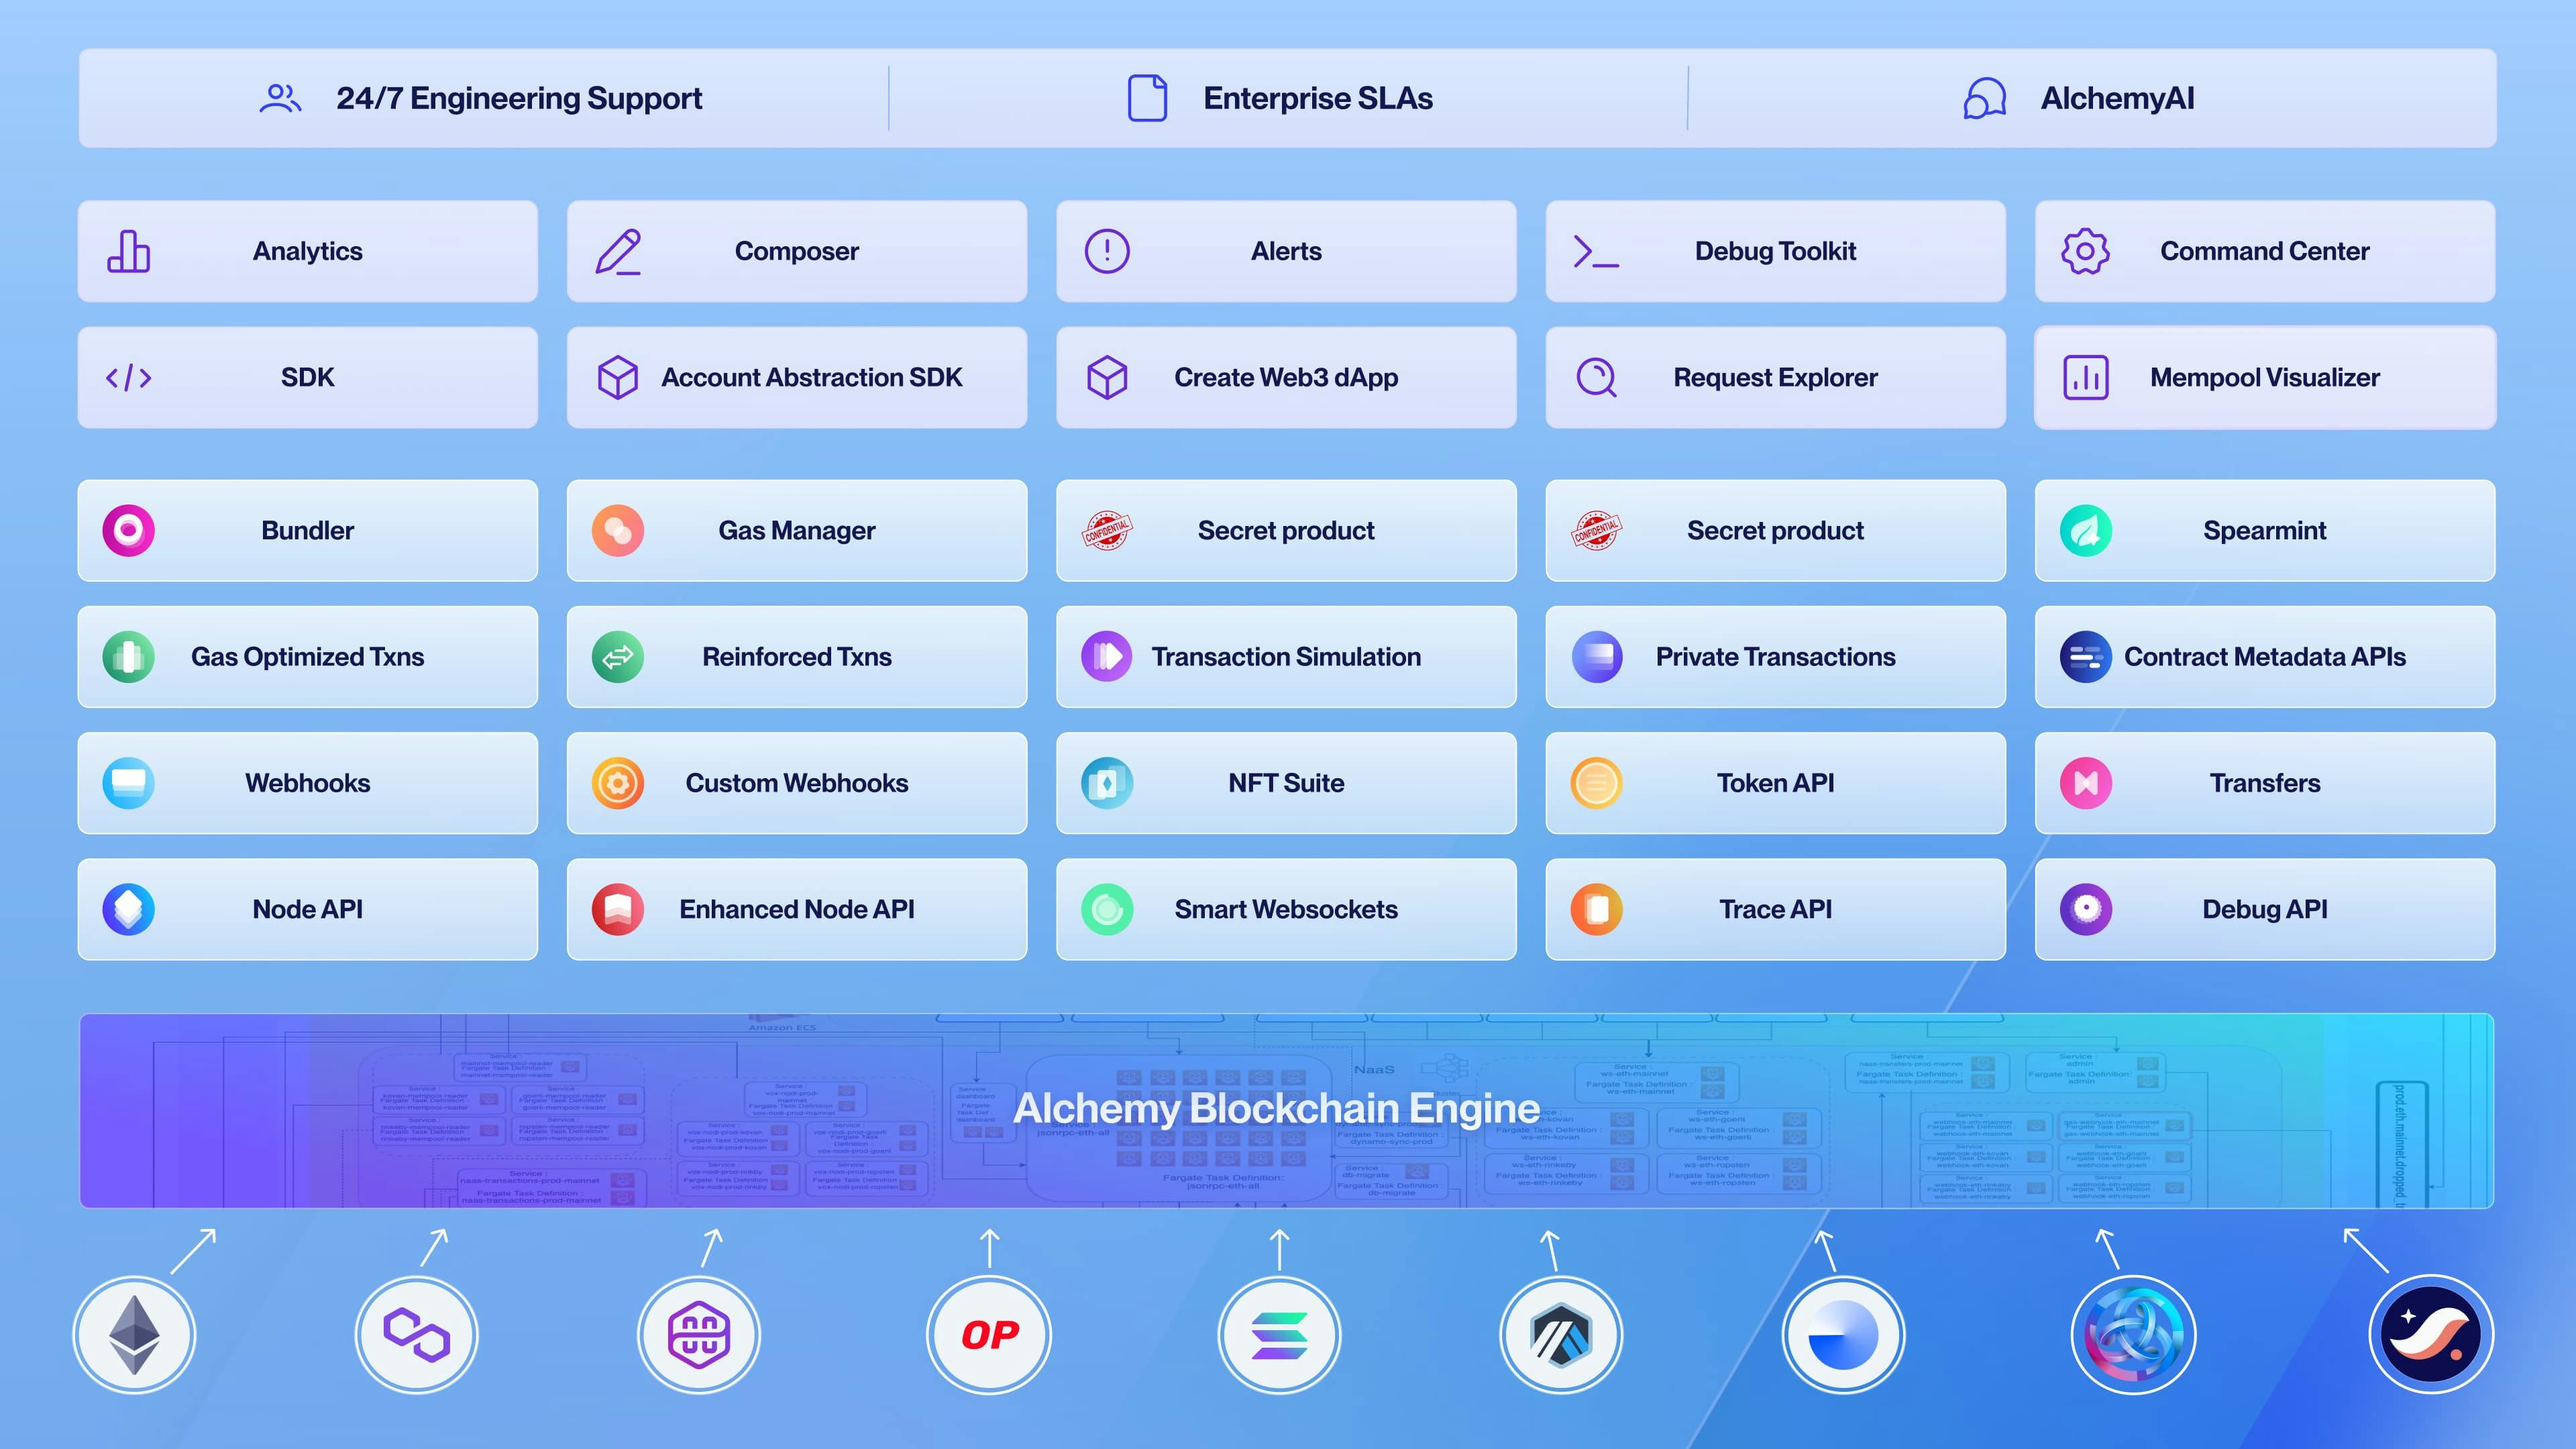 Products Included in Alchemy's Development Platform